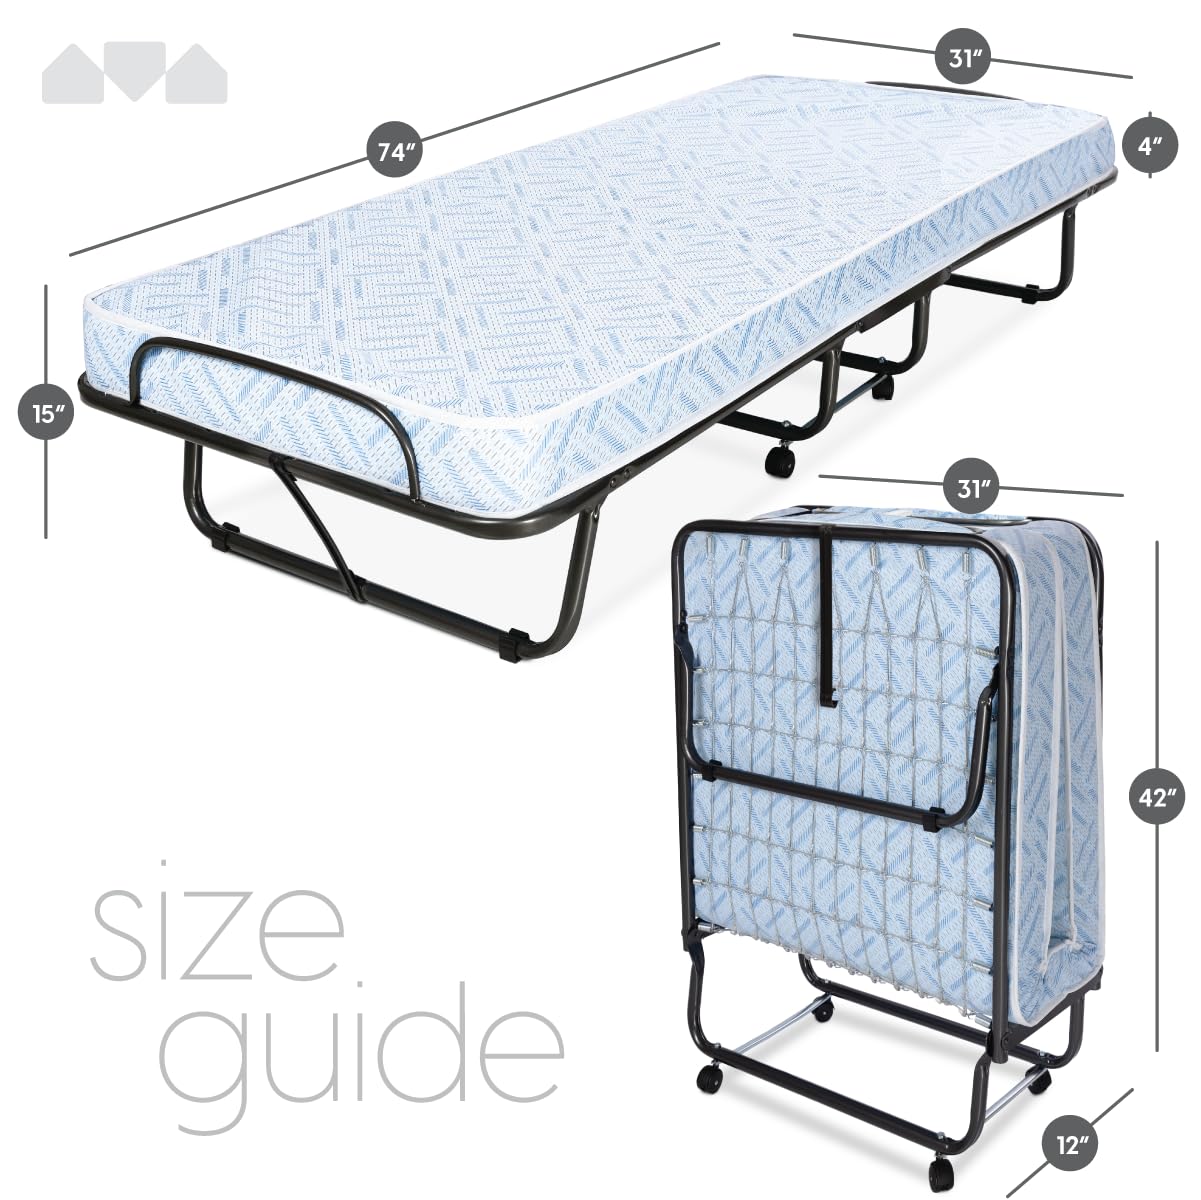 Milliard Lightweight Folding Cot with Mattress 31x75 (not Intended for  Heavy Duty use)